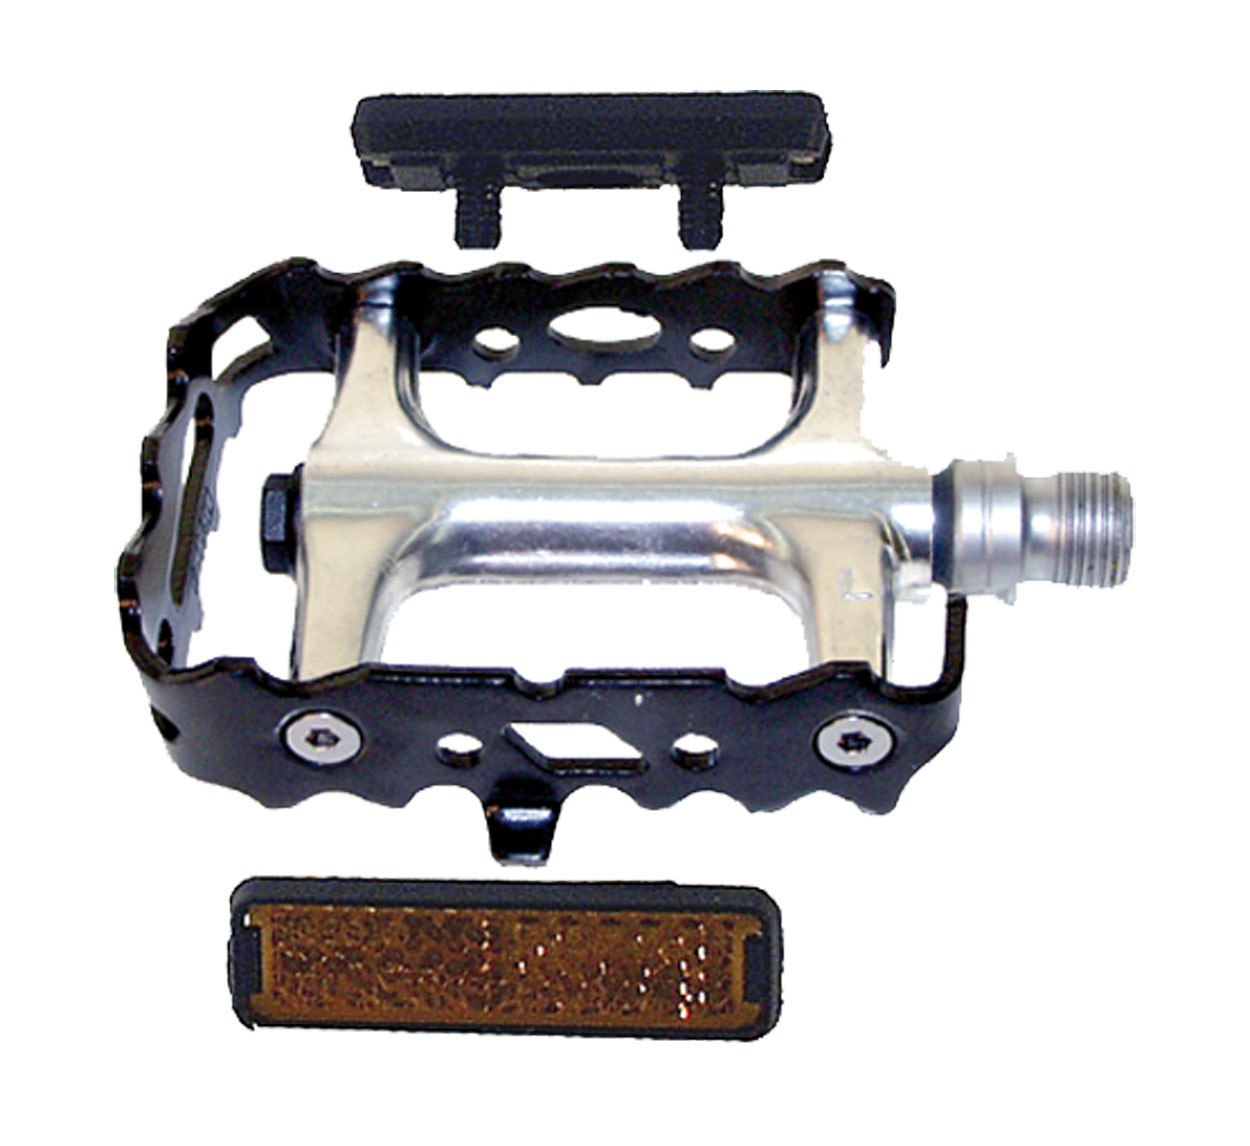  VP Pedals MTB Alloy Body & Cage Cartridge Bearing 9/16Inch   VP Pedals MTB Alloy Body & Cage Cartridge Bearing 9/16Inch 